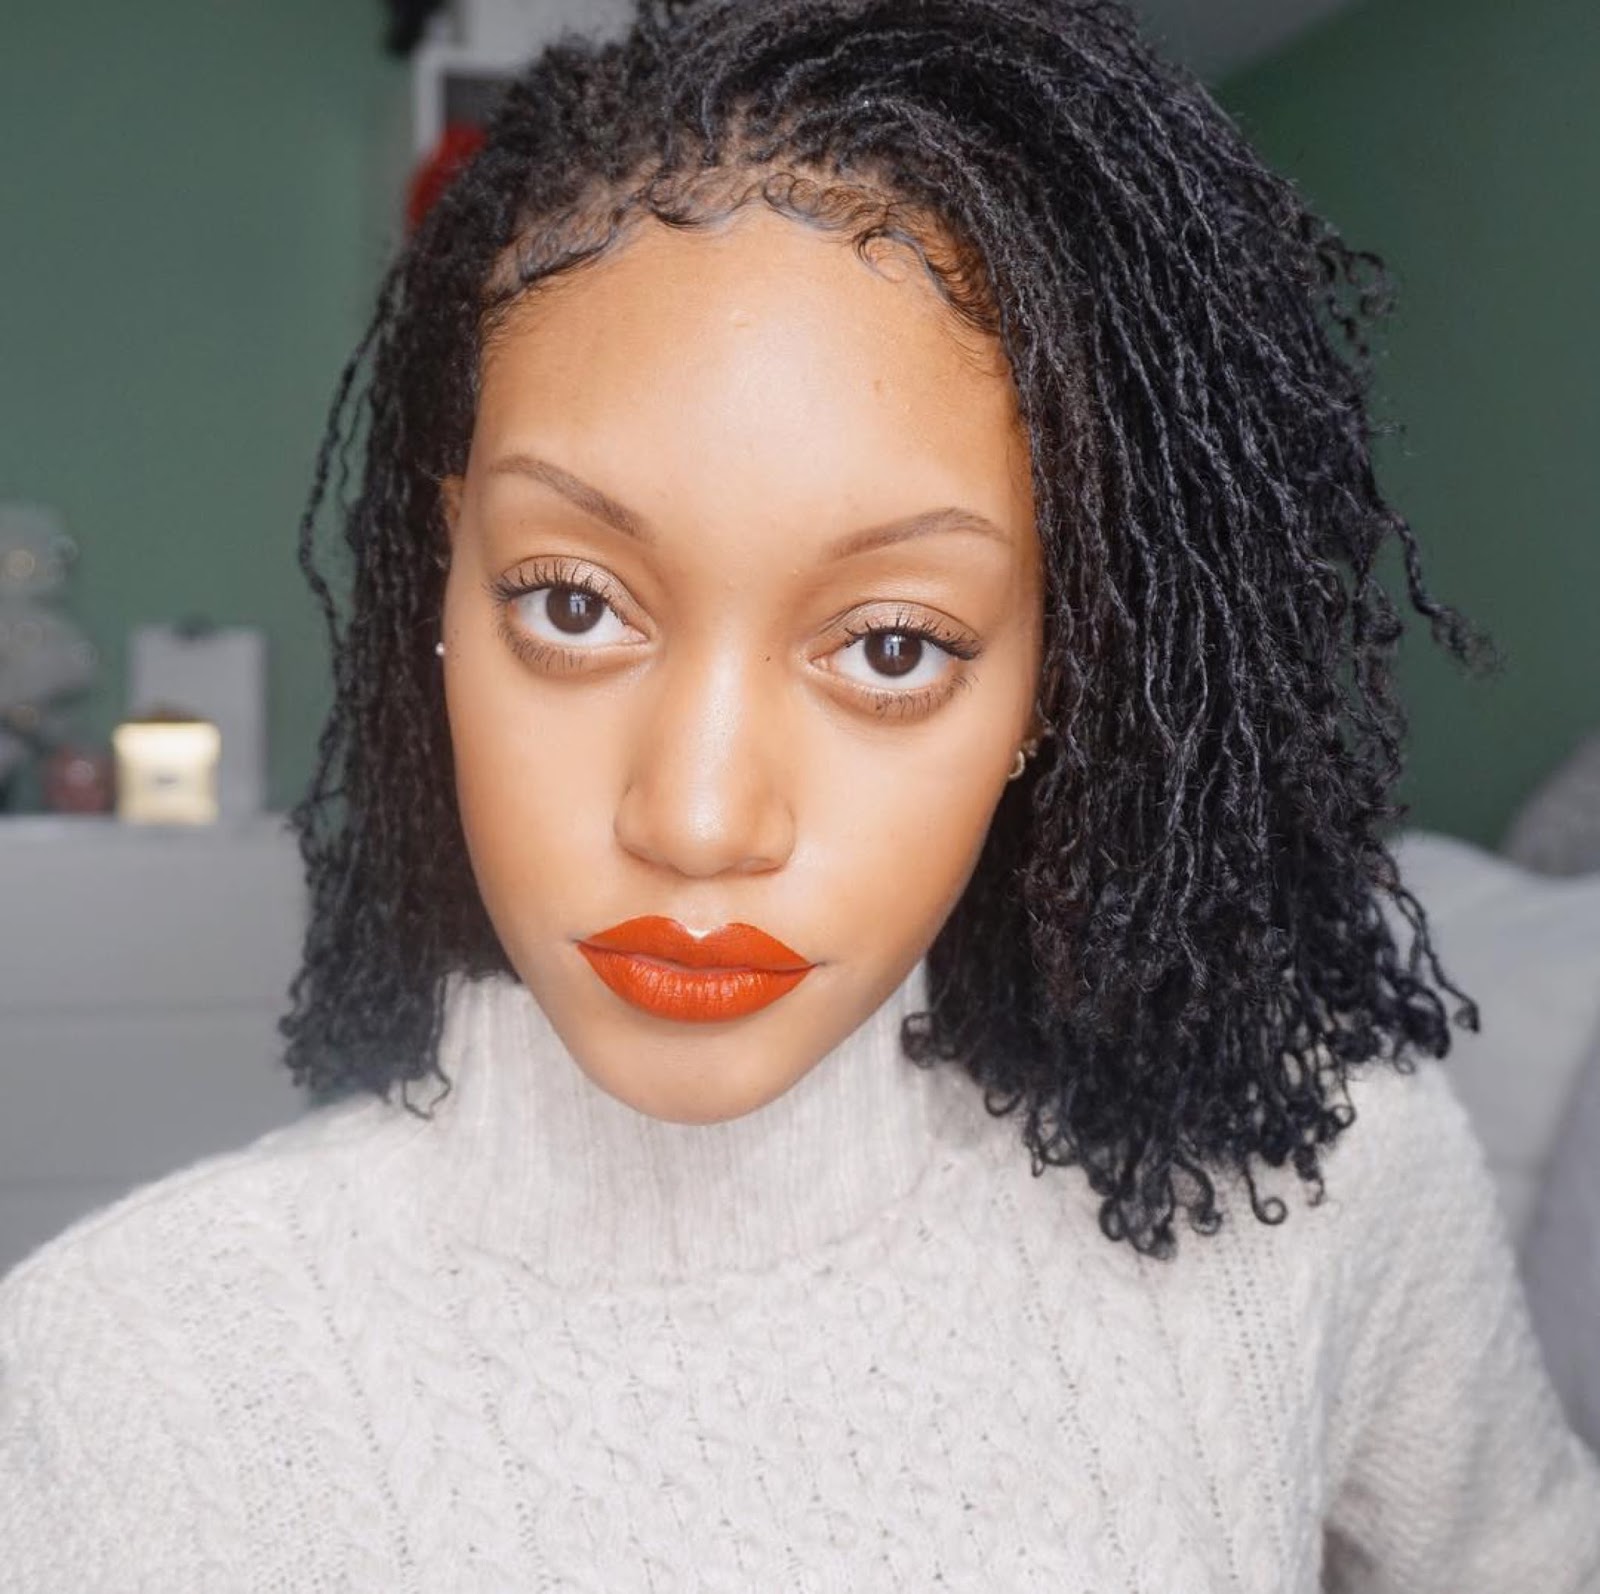 5 Amazing loc and sisterlocks bloggers and vloggers you should be following